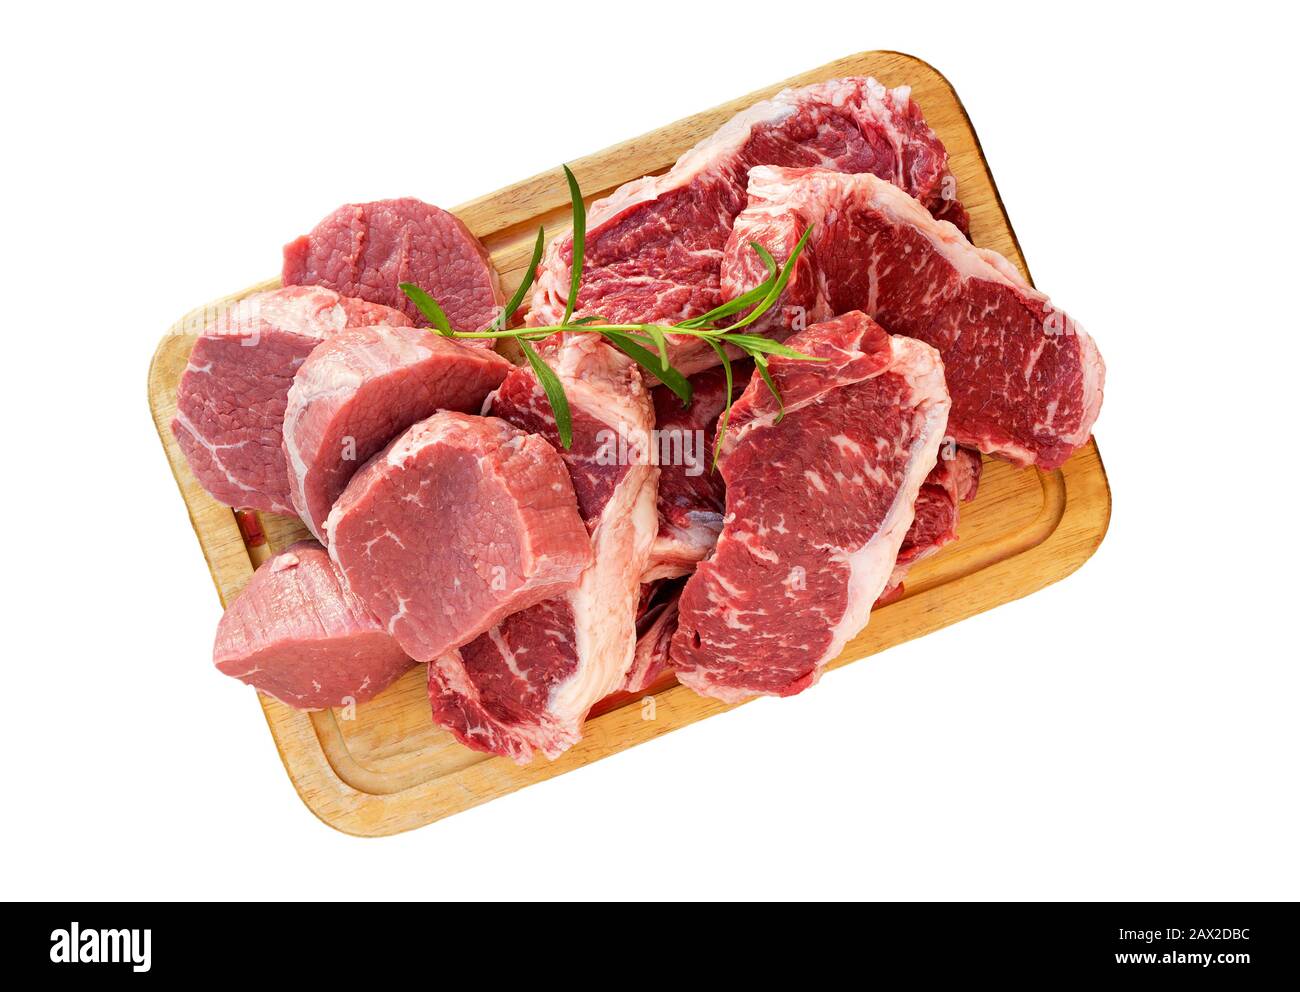 https://c8.alamy.com/comp/2AX2DBC/fresh-raw-beef-meat-steak-slices-on-wooden-cut-board-isolated-on-white-background-meat-wooden-chopping-board-2AX2DBC.jpg